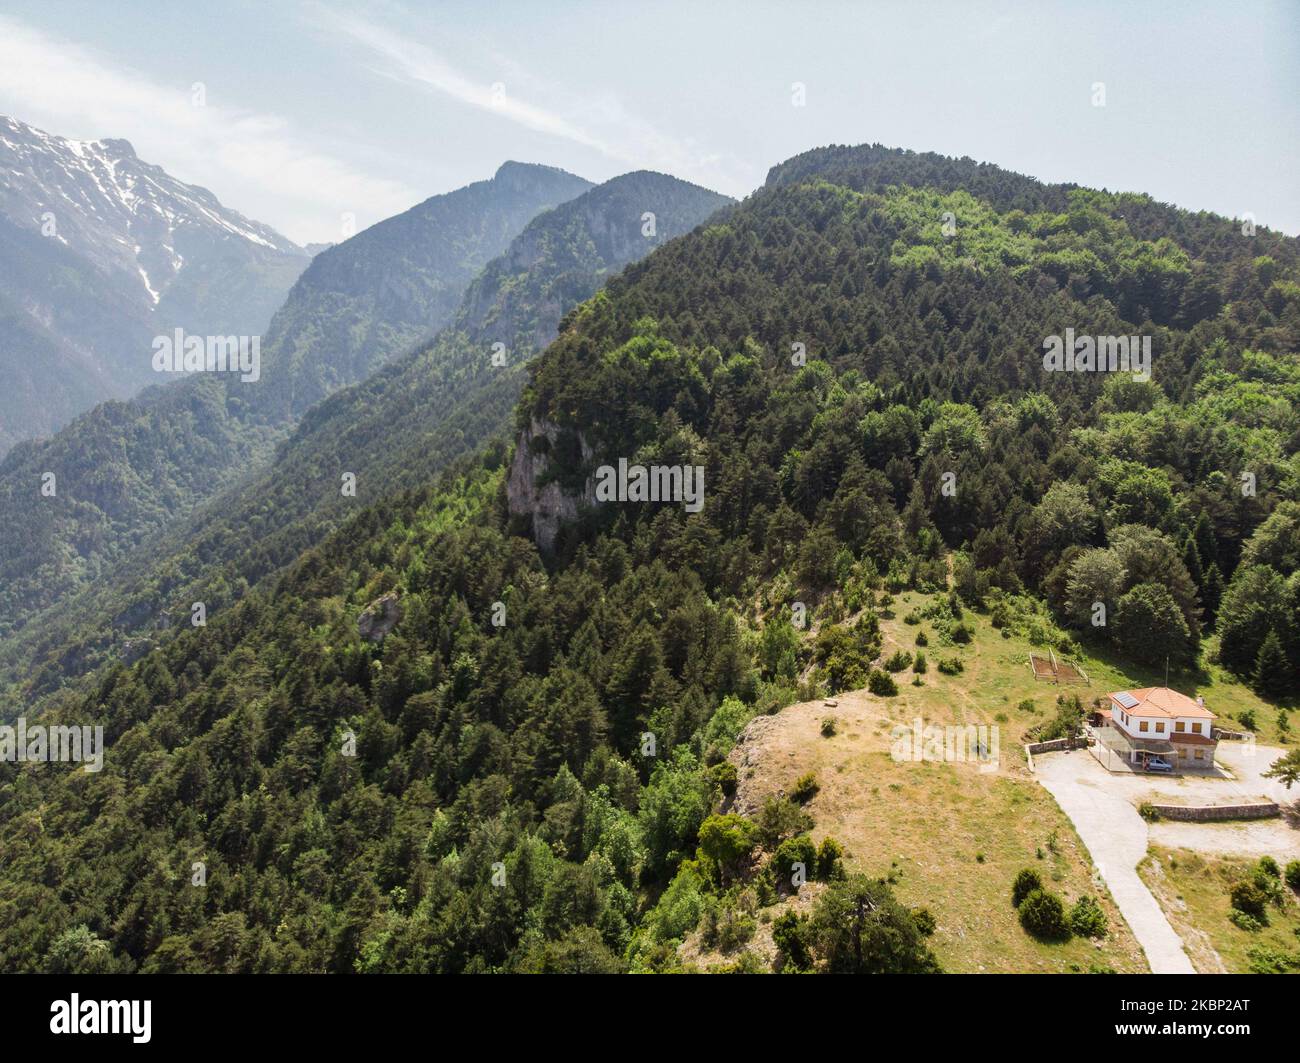 Aerial view of Mount Olympus, the highest mountain in Greece as seen from a drone with the steep hills, gorges, deep canyons, caves, thick forest and snow-covered peaks. The highest peak is Mytikasat 2918 meters and the mountain was notable in Greek Mythology as home of the gods. It is a National Park in Greece and a World Biosphere Reserve with rich biodiversity and flora. Olympus is an organized mountain with mount activities with many mountain refuges and many climbing and trekking routes for hikers or climbers. Near Olympus are the located the golden sand beaches of Pieria offering the com Stock Photo